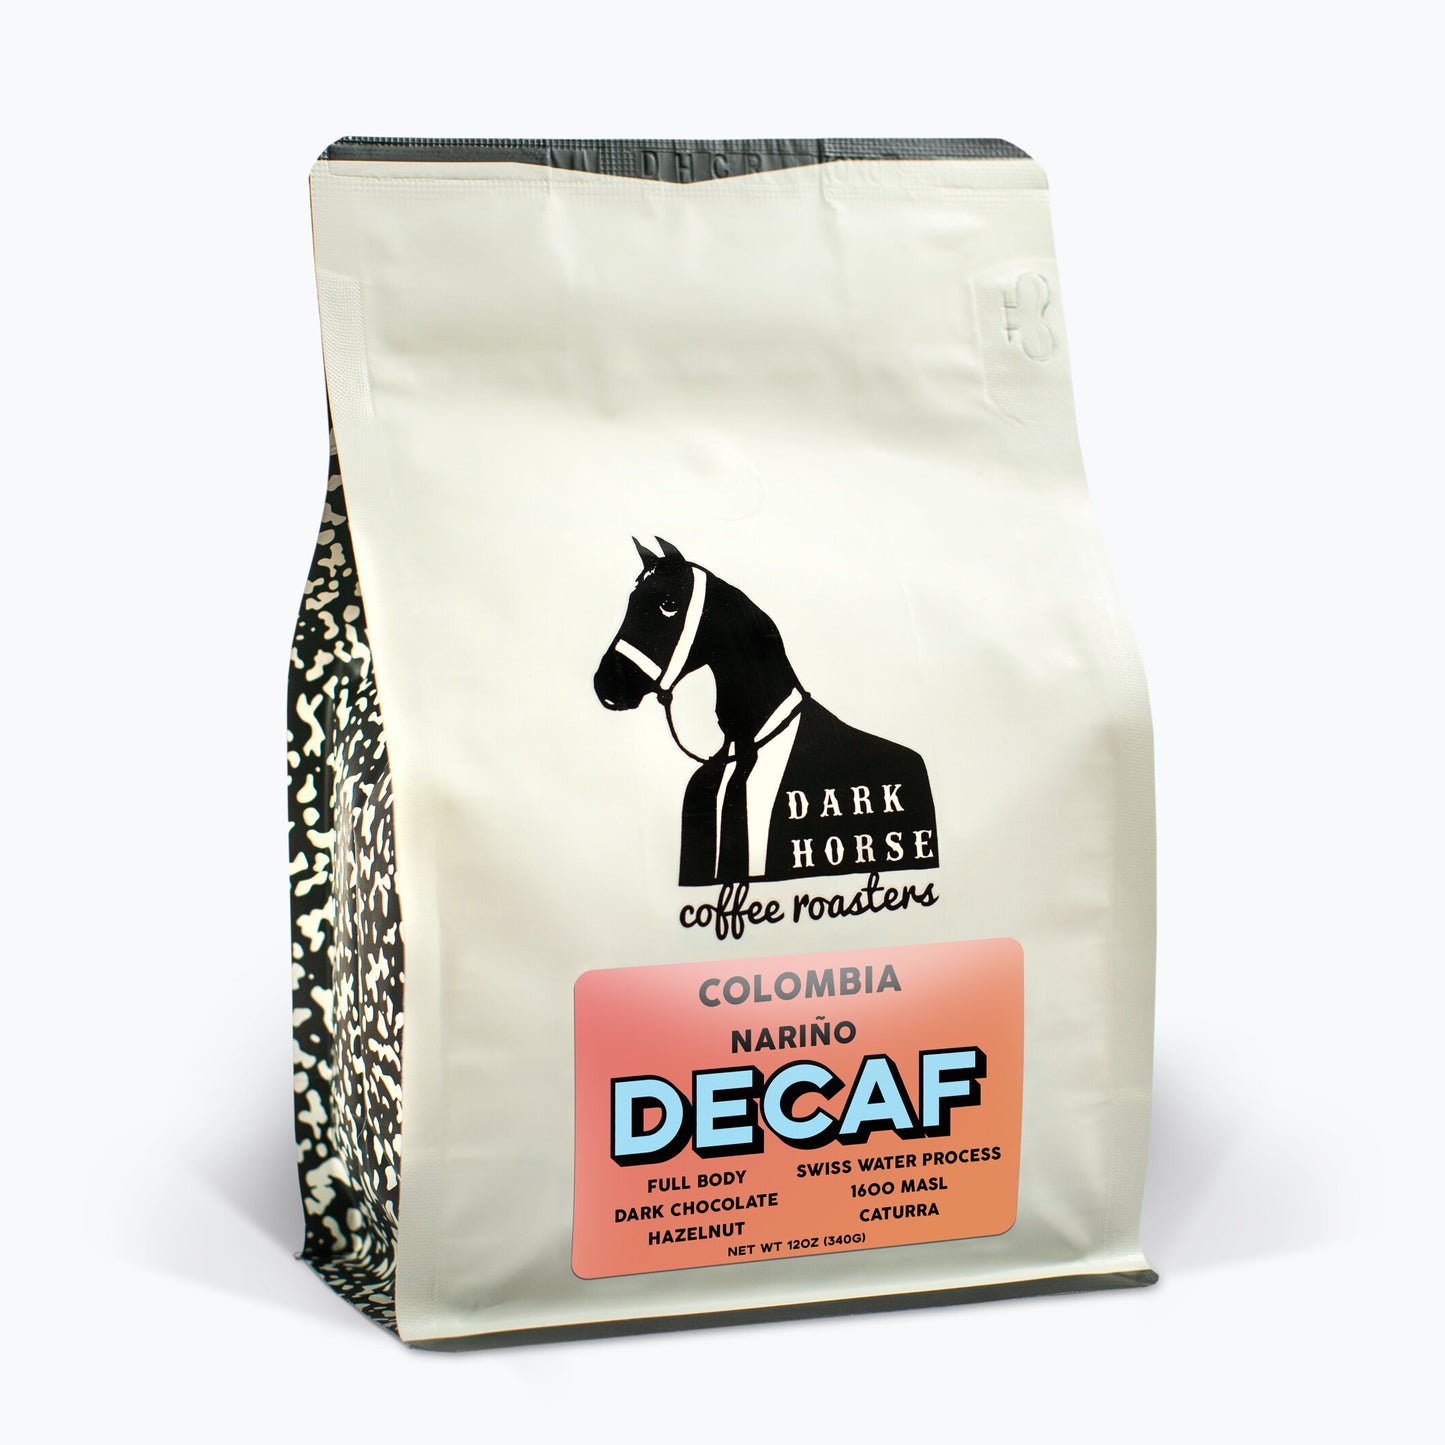 Decaf Colombian coffee from Dark Horse Coffee Roasters